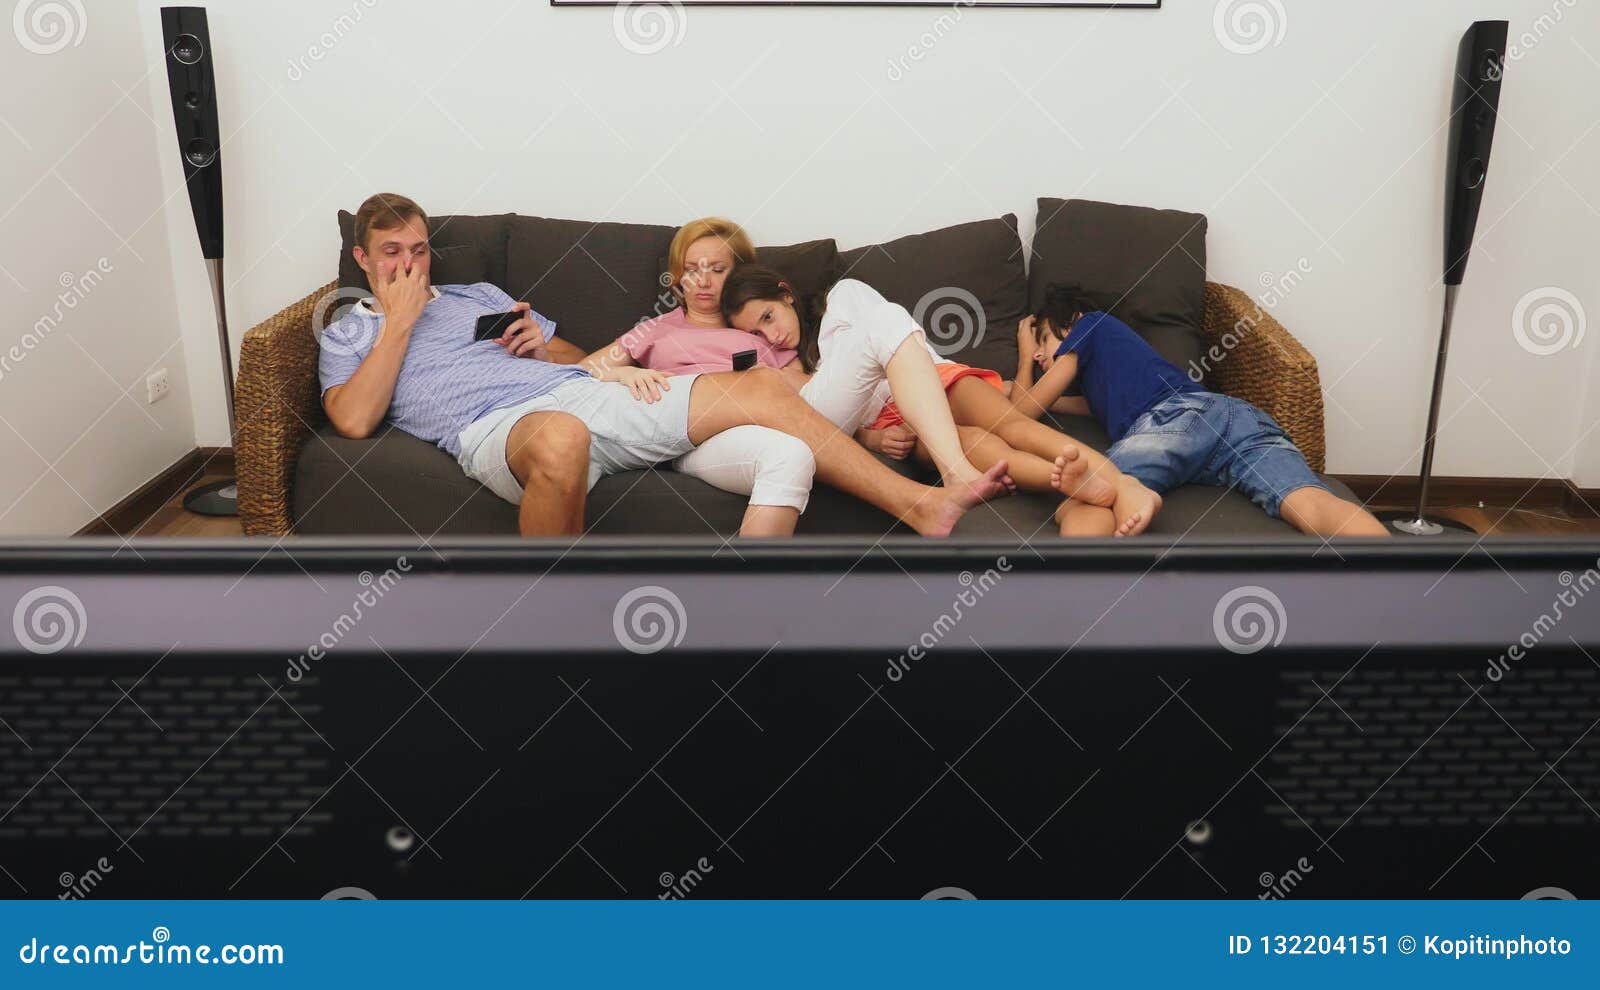 Amateur threesome watching tv